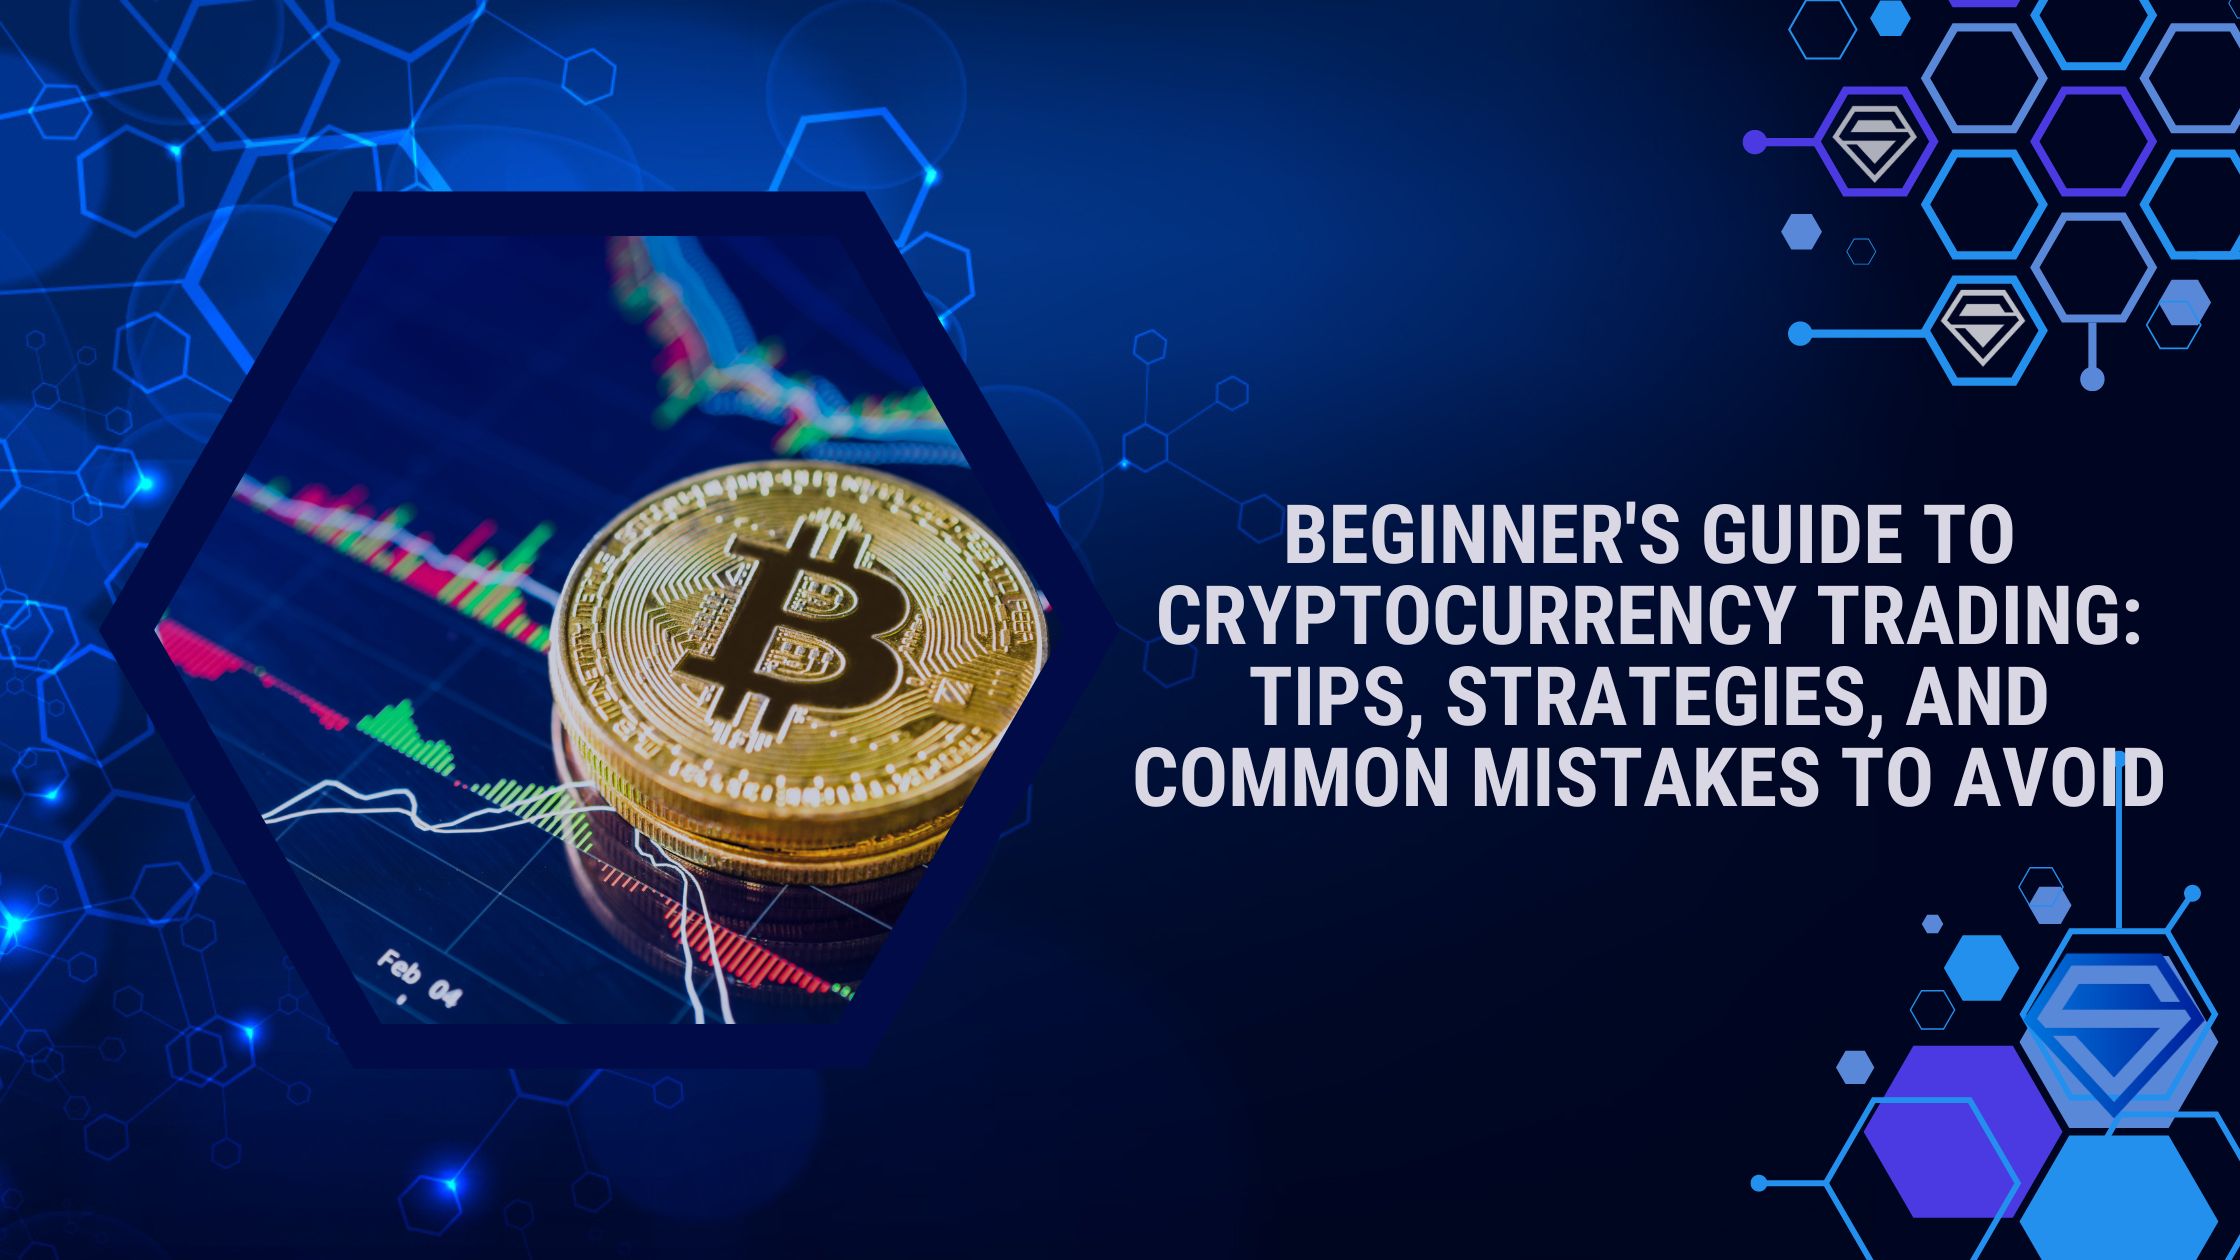 Beginner’s Guide to Cryptocurrency Trading: Tips, Strategies, and Common Mistakes to Avoid